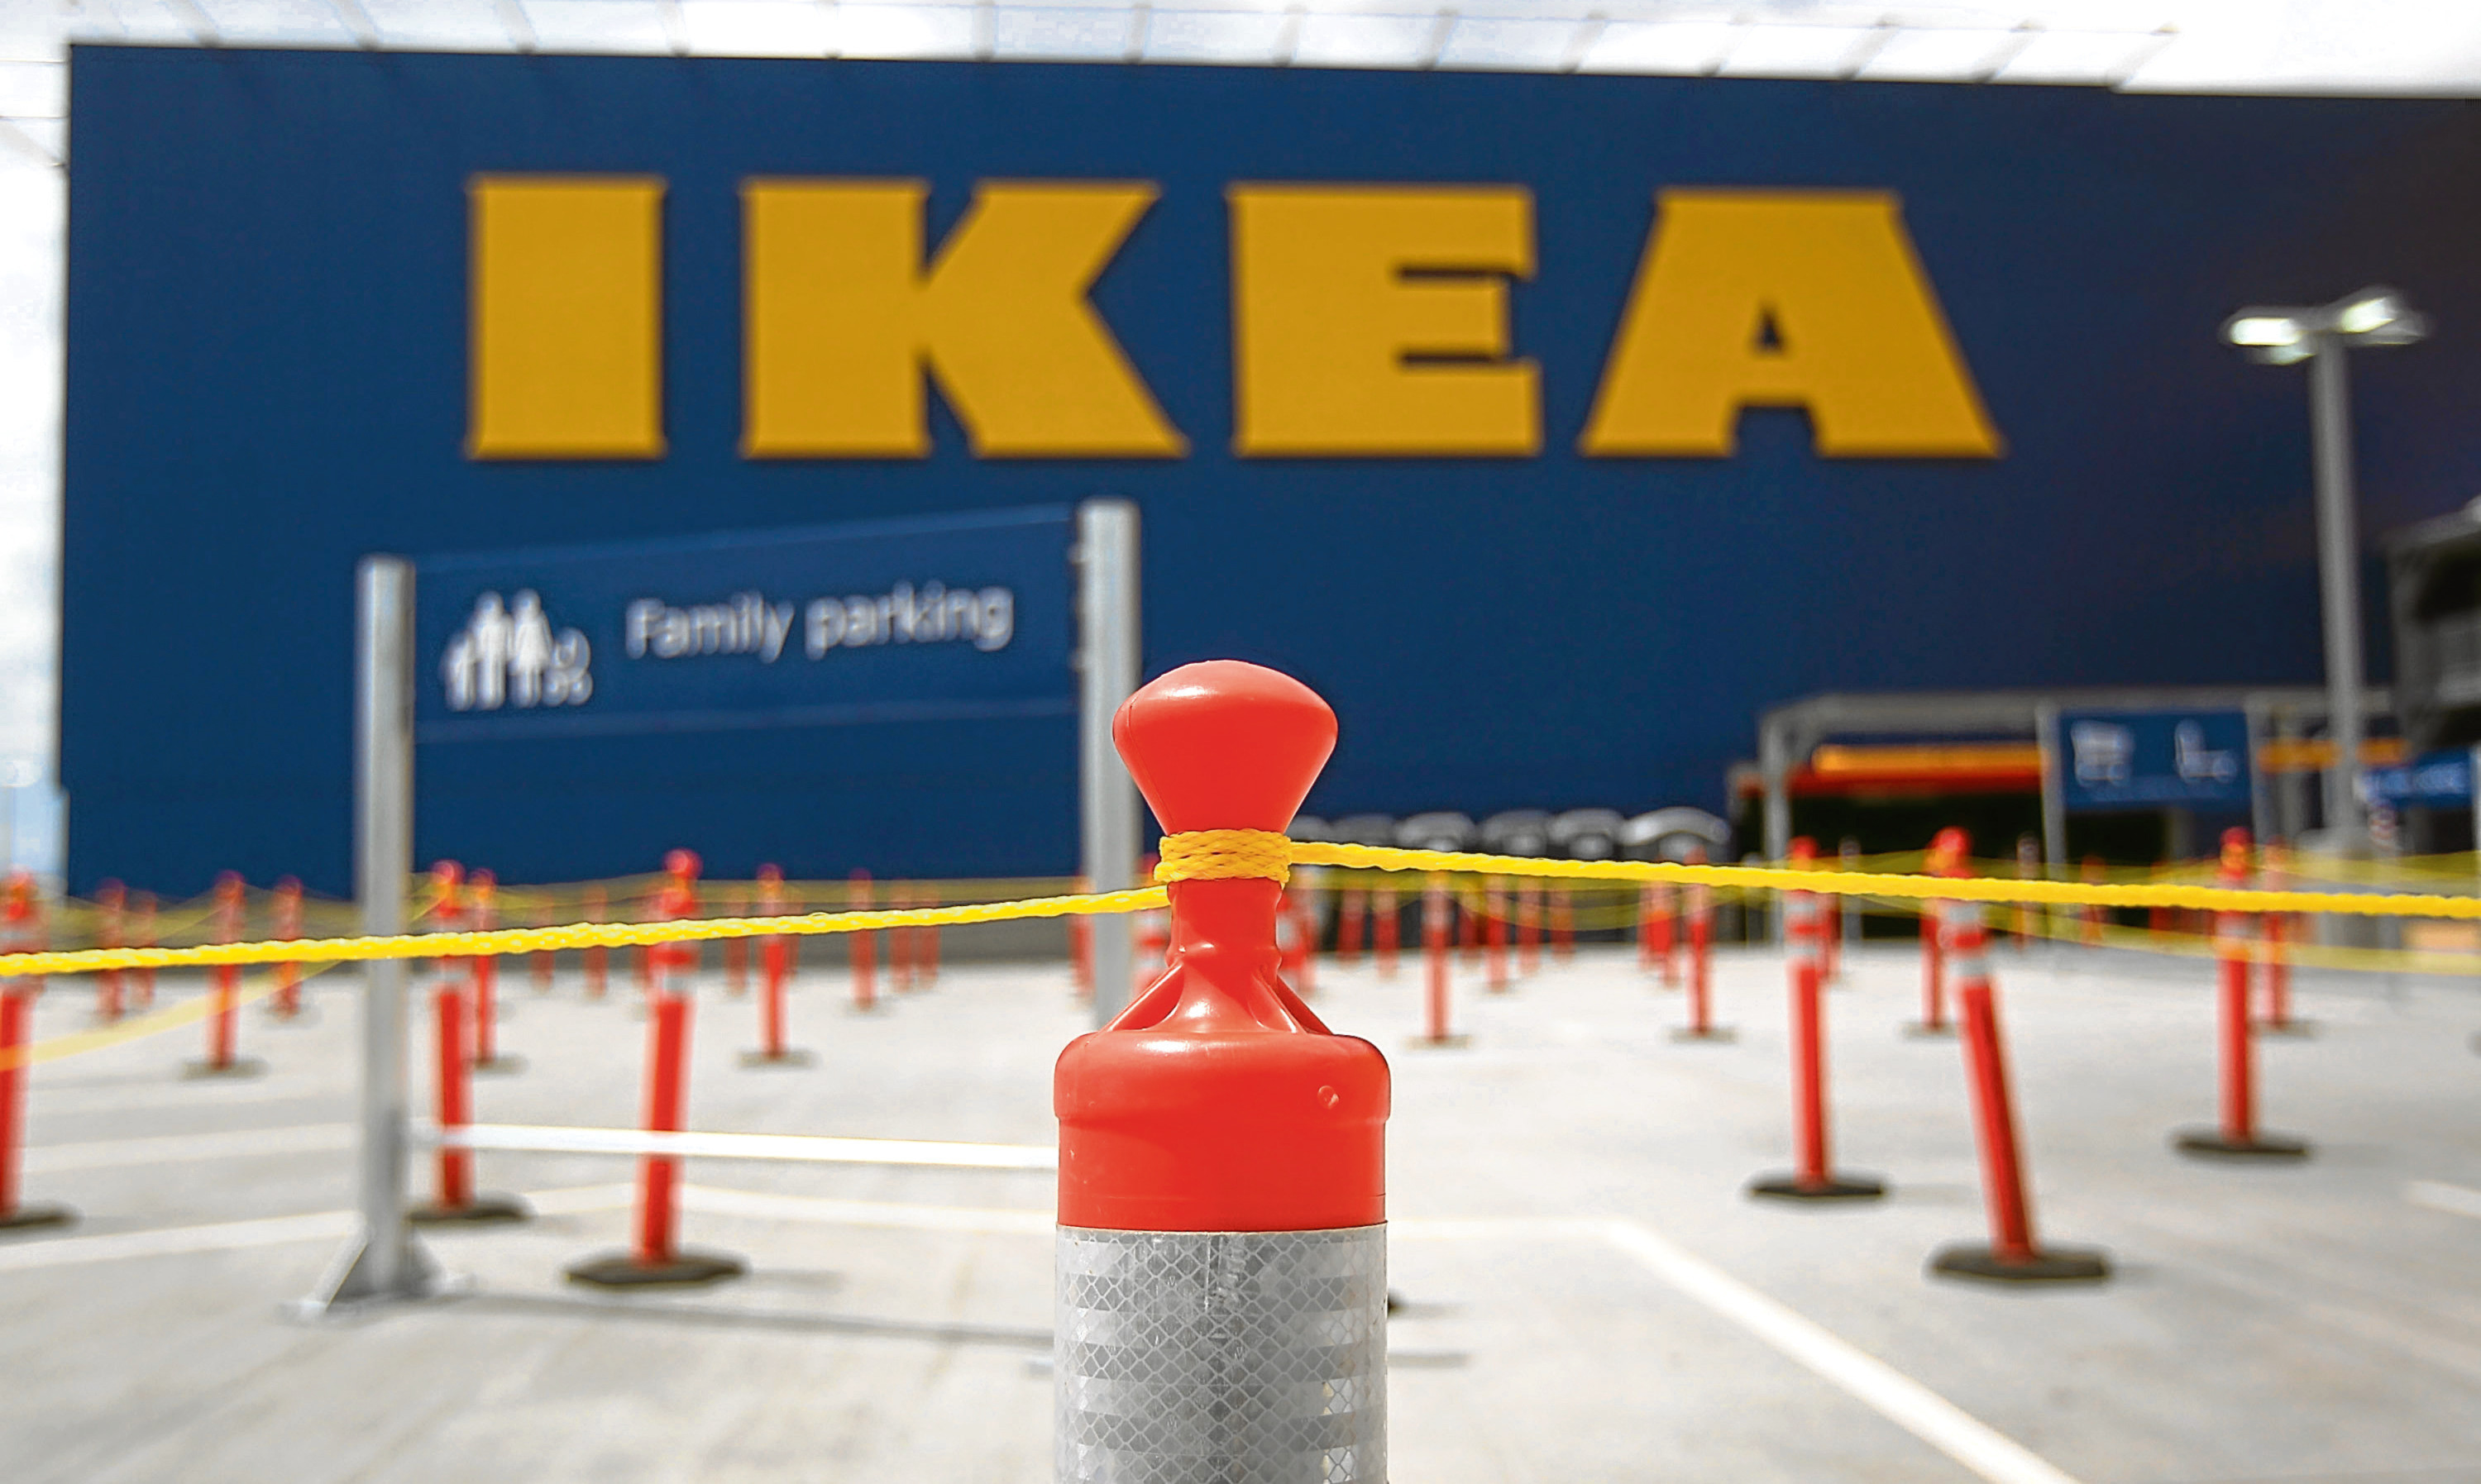 Youngsters have been staying overnight in Ikea stores by hiding in cupboards then jumping on beds.